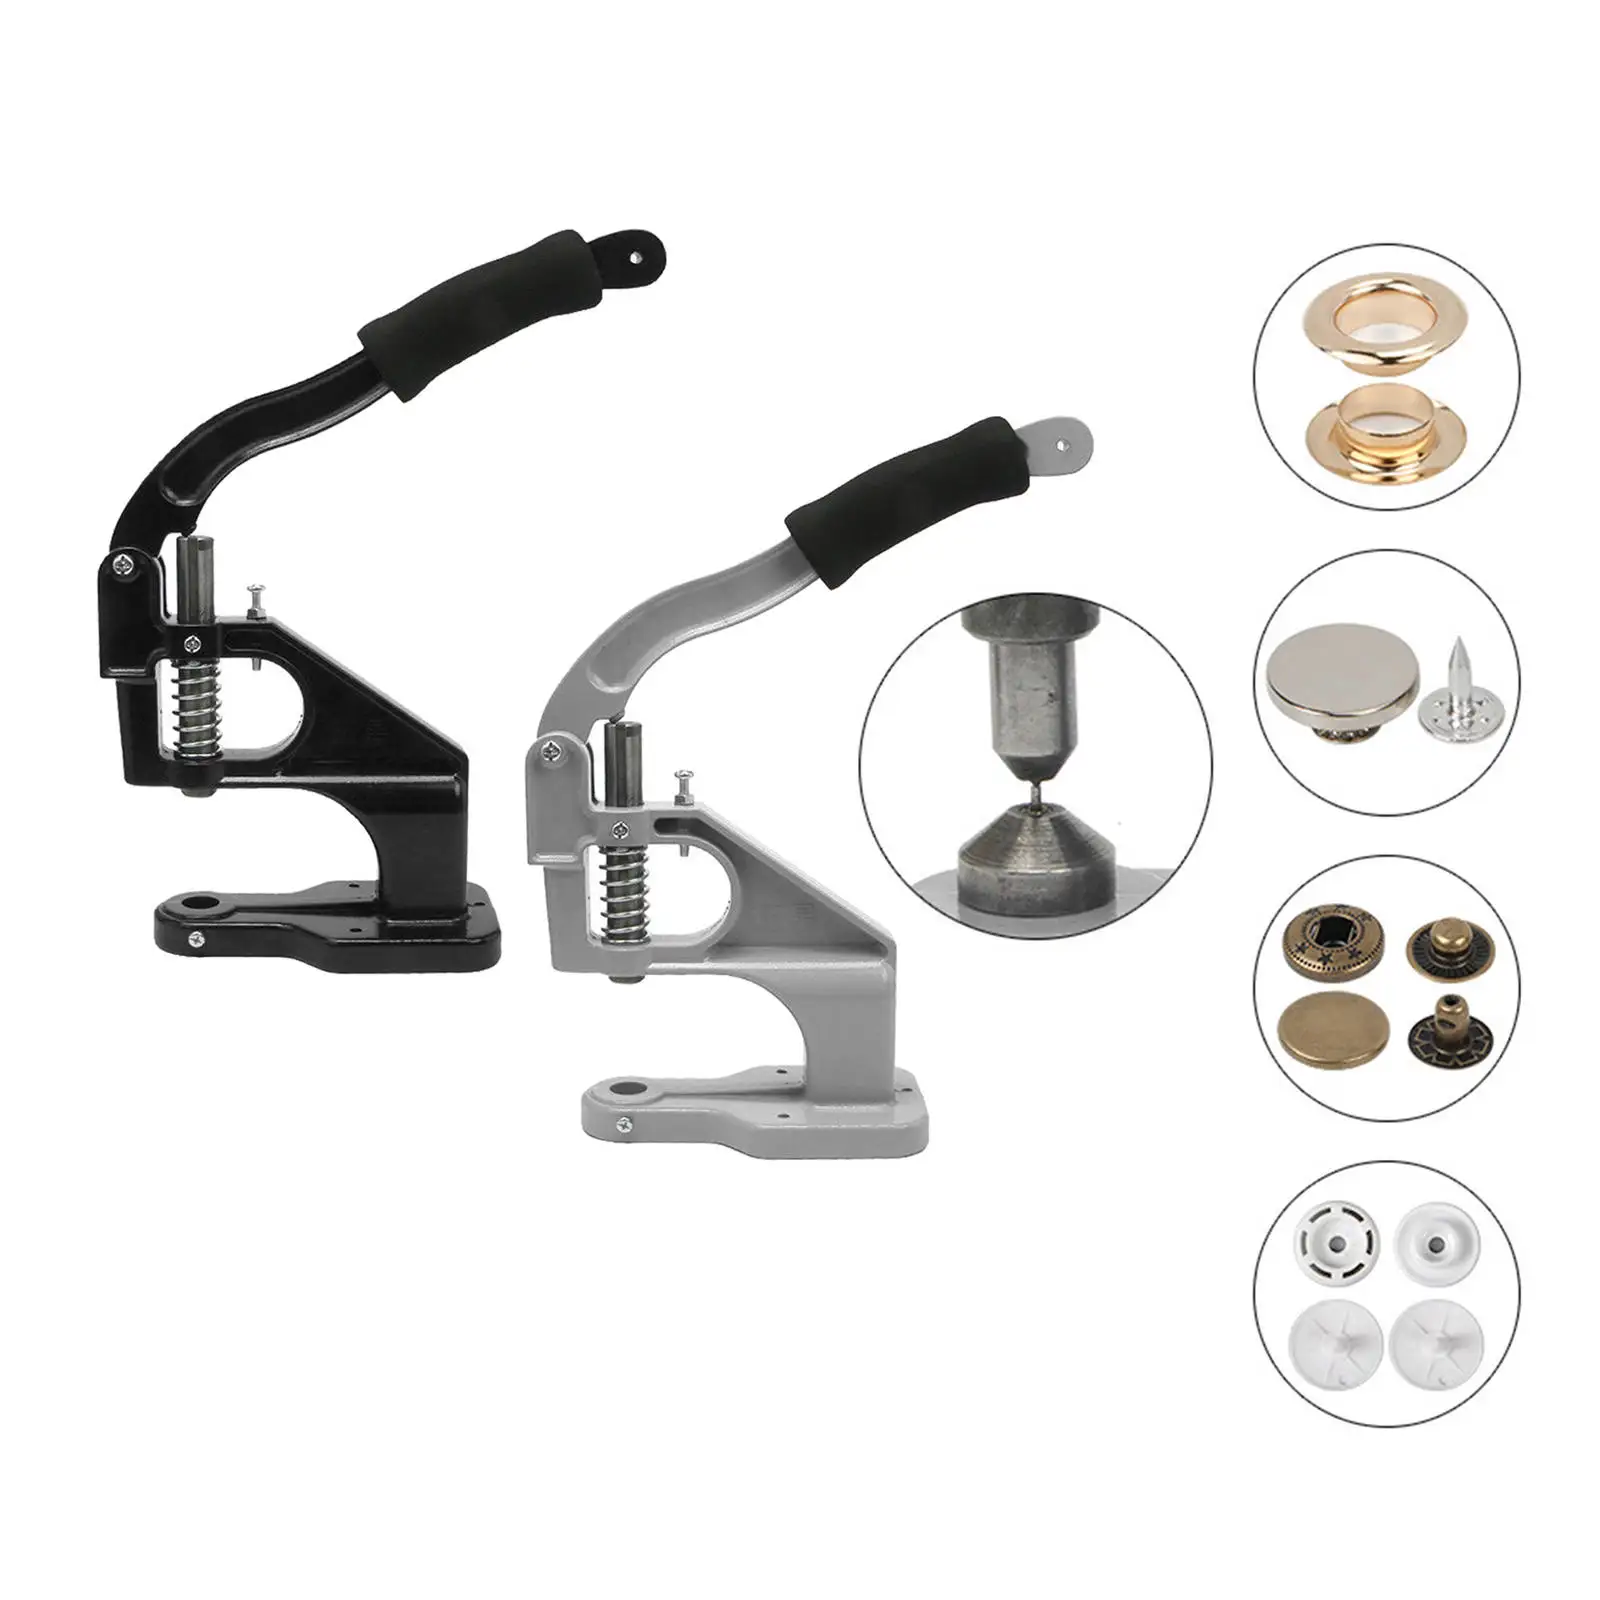 Manual Hand Press Hole Punch Machine for Buttons, Grommets, Snap Buttons, Rivets, Eyelets, Pearl Rivets, Fabric Covered Buttons